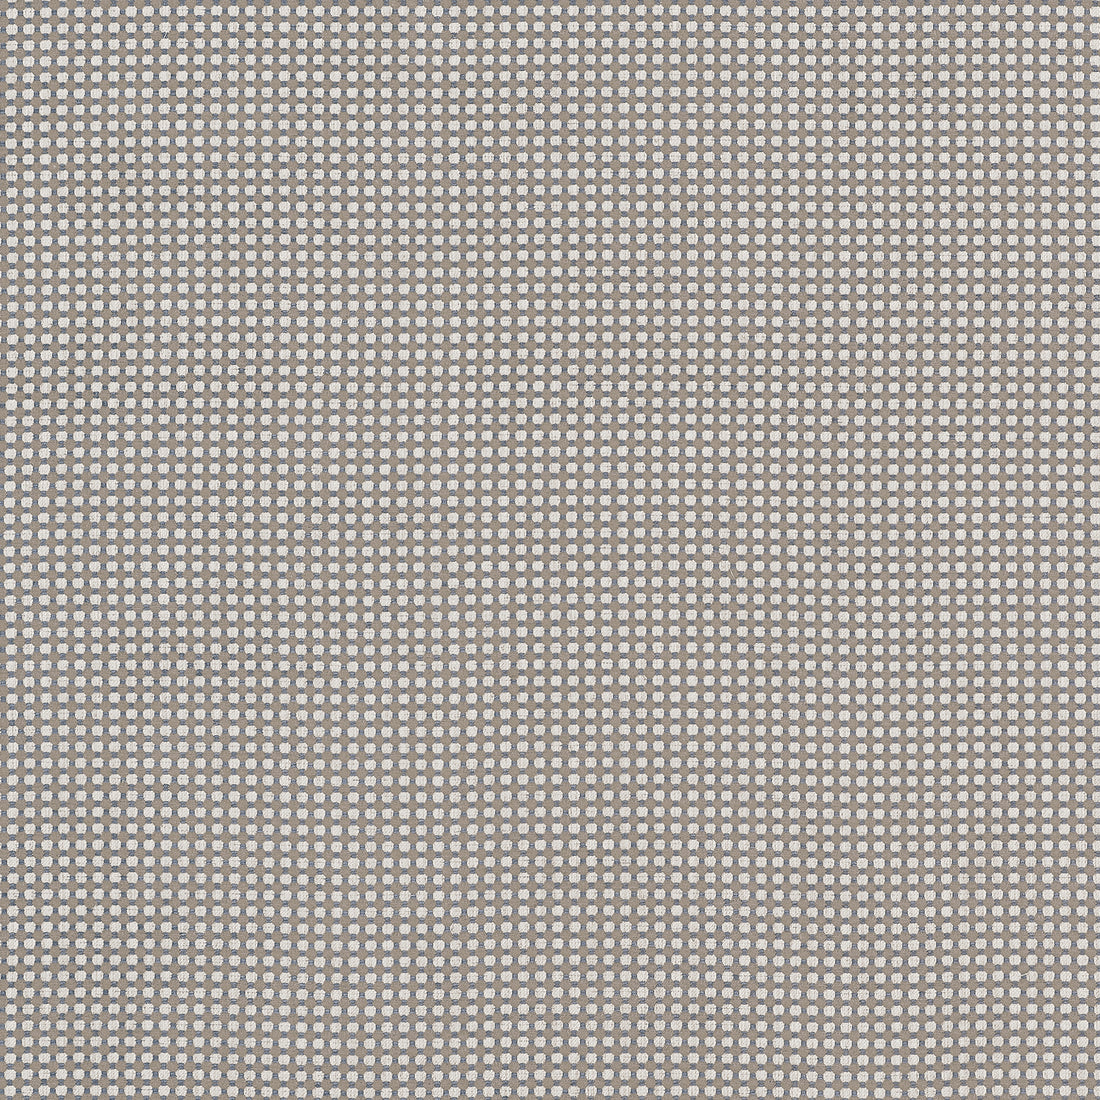 Darcy fabric in ash color - pattern number W81921 - by Thibaut in the Companions collection